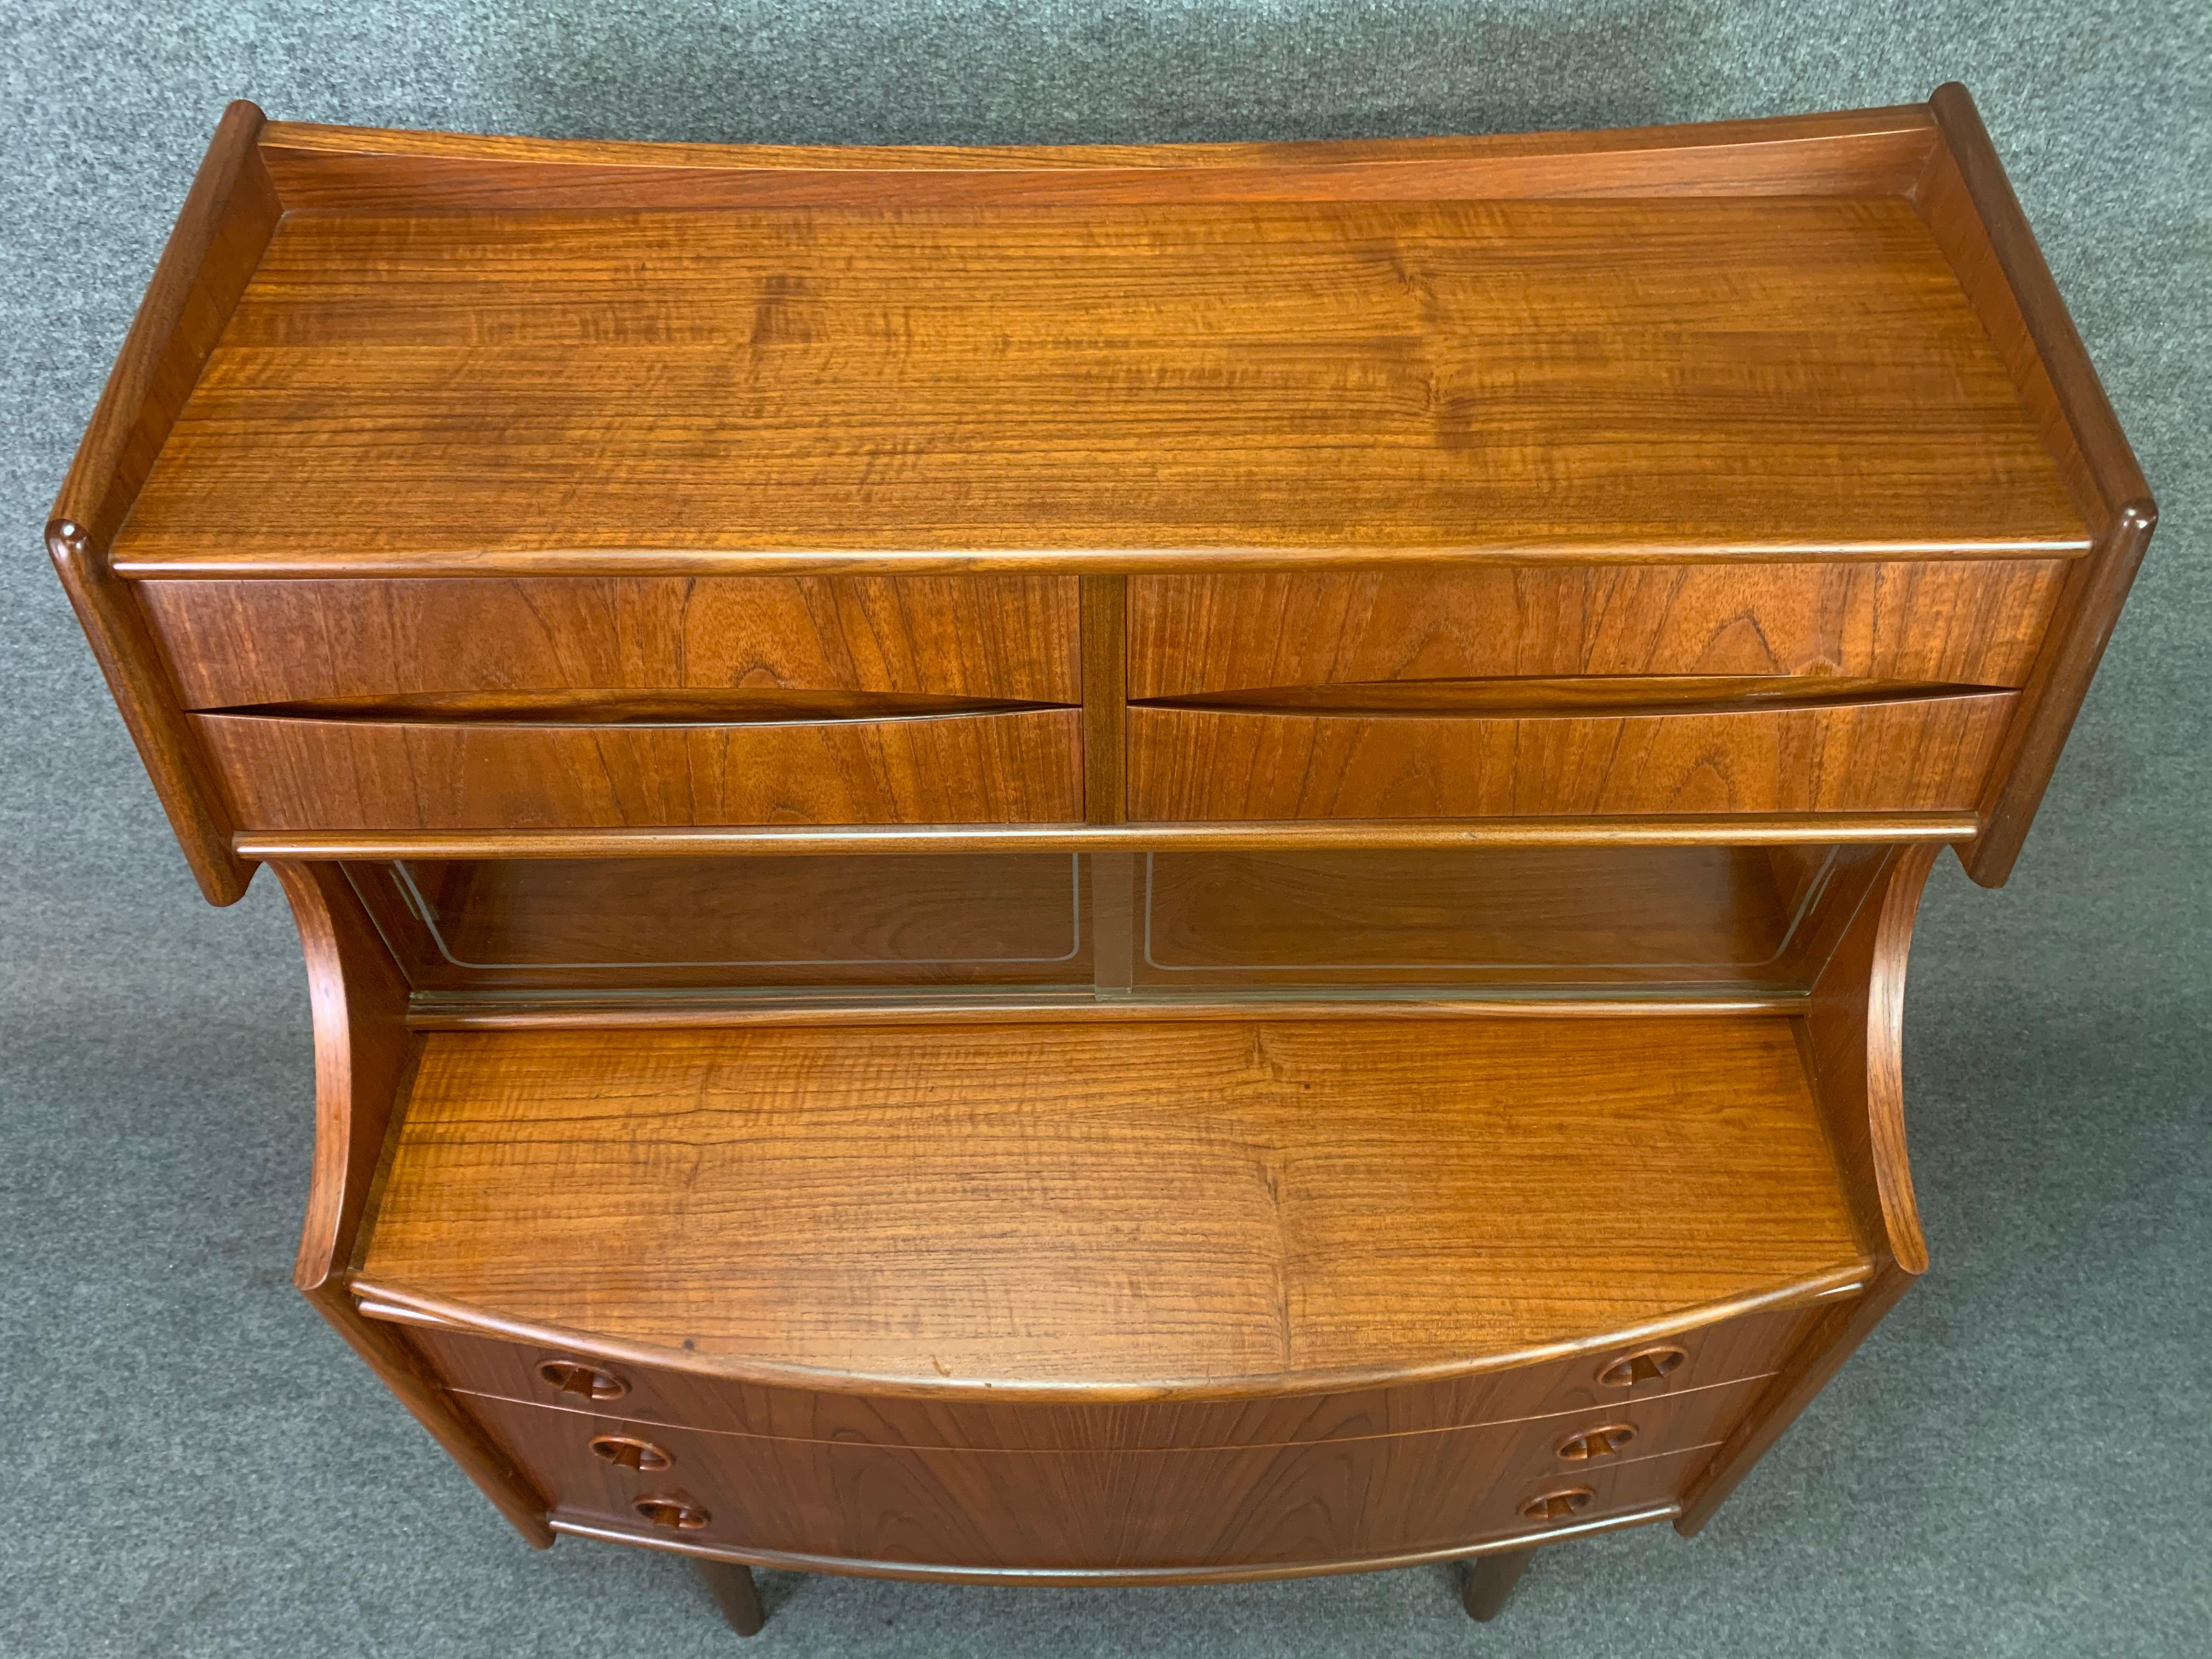 Here is an exquisite 1960s secretary desk in teak wood attributed to famed designer Arne Vodder recently imported from Denmark to California. On its lower side, this case good features beautiful detail in carved handles of all three stacked dovetail